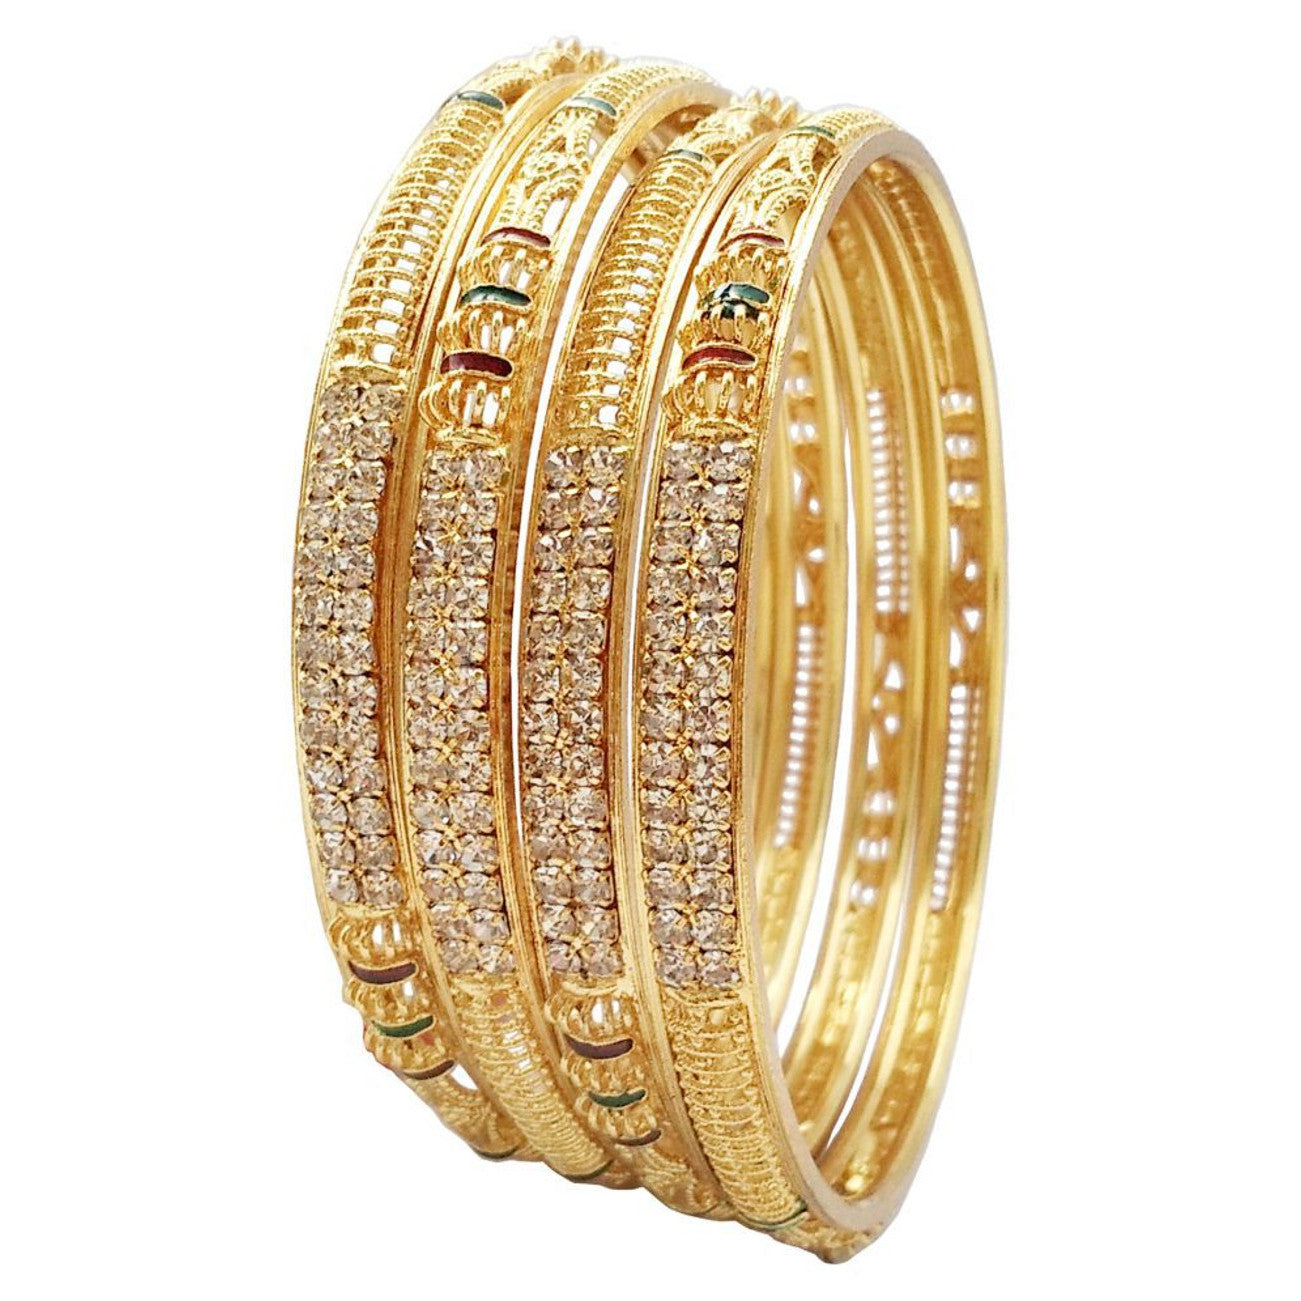  Gold Plated Bangles For Women| Buy This Jewellery from Mekkna